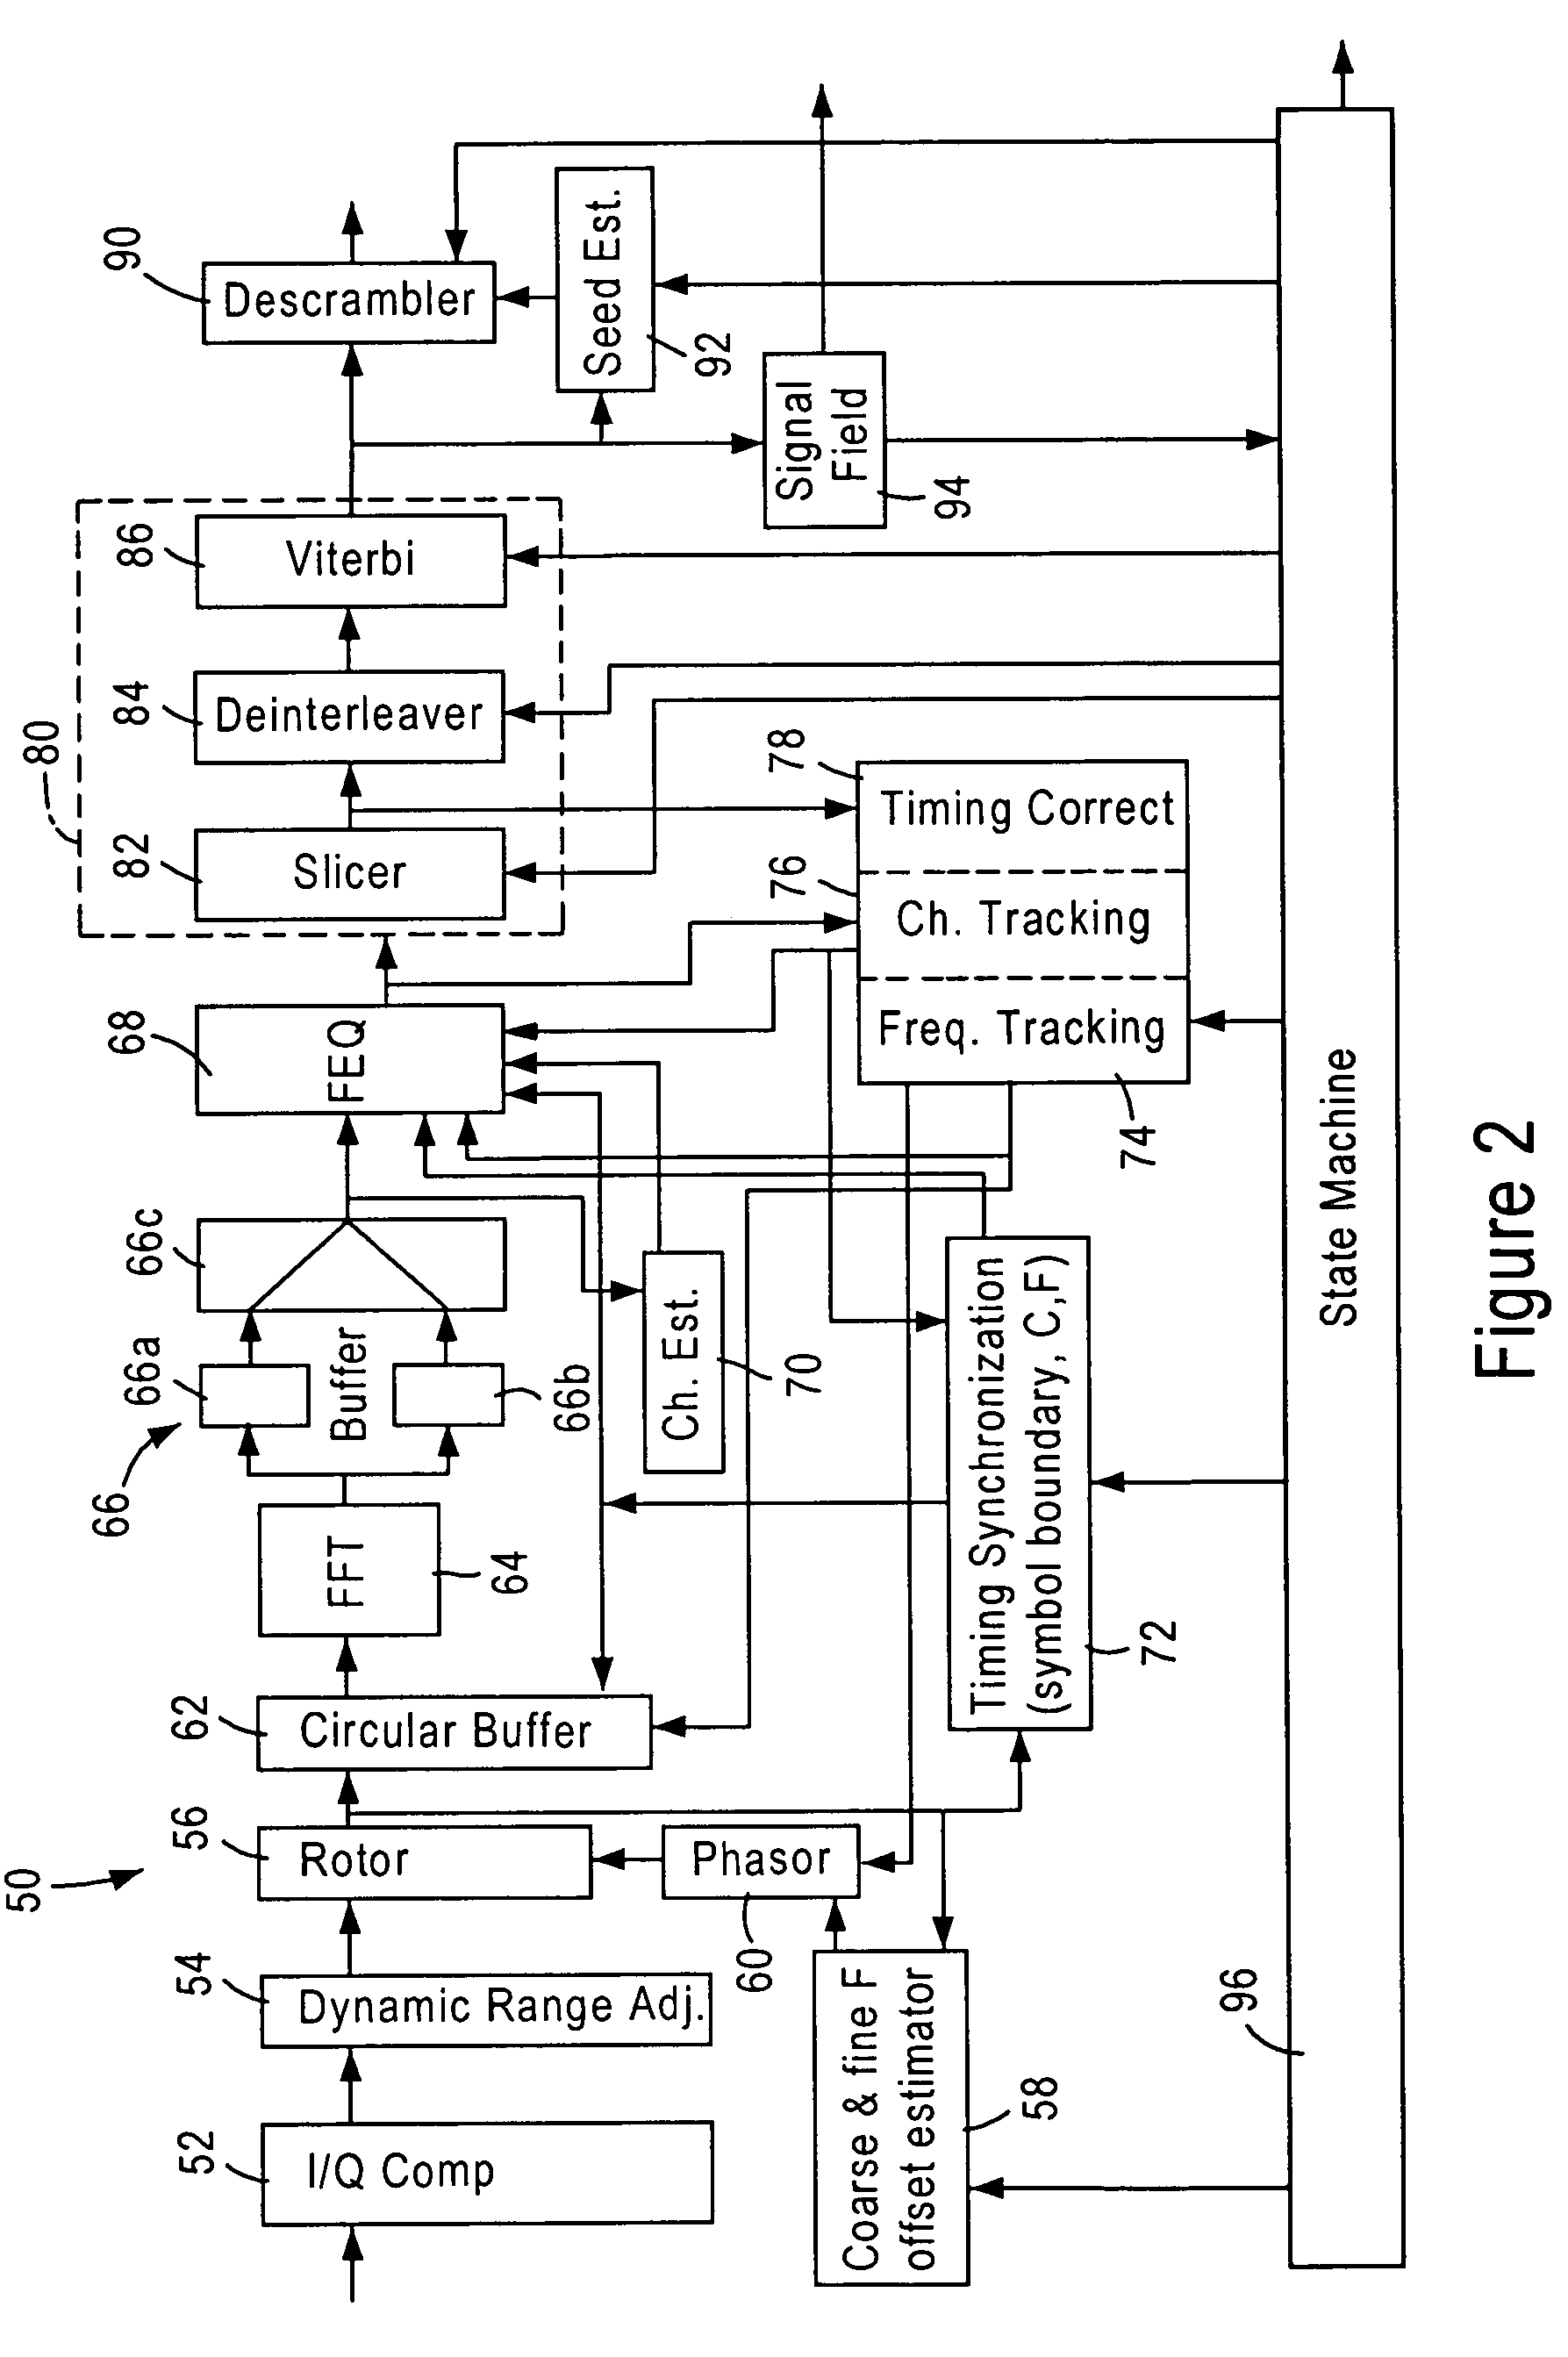 Channel tracking using step size based on norm-1 based errors across multiple OFDM symbols